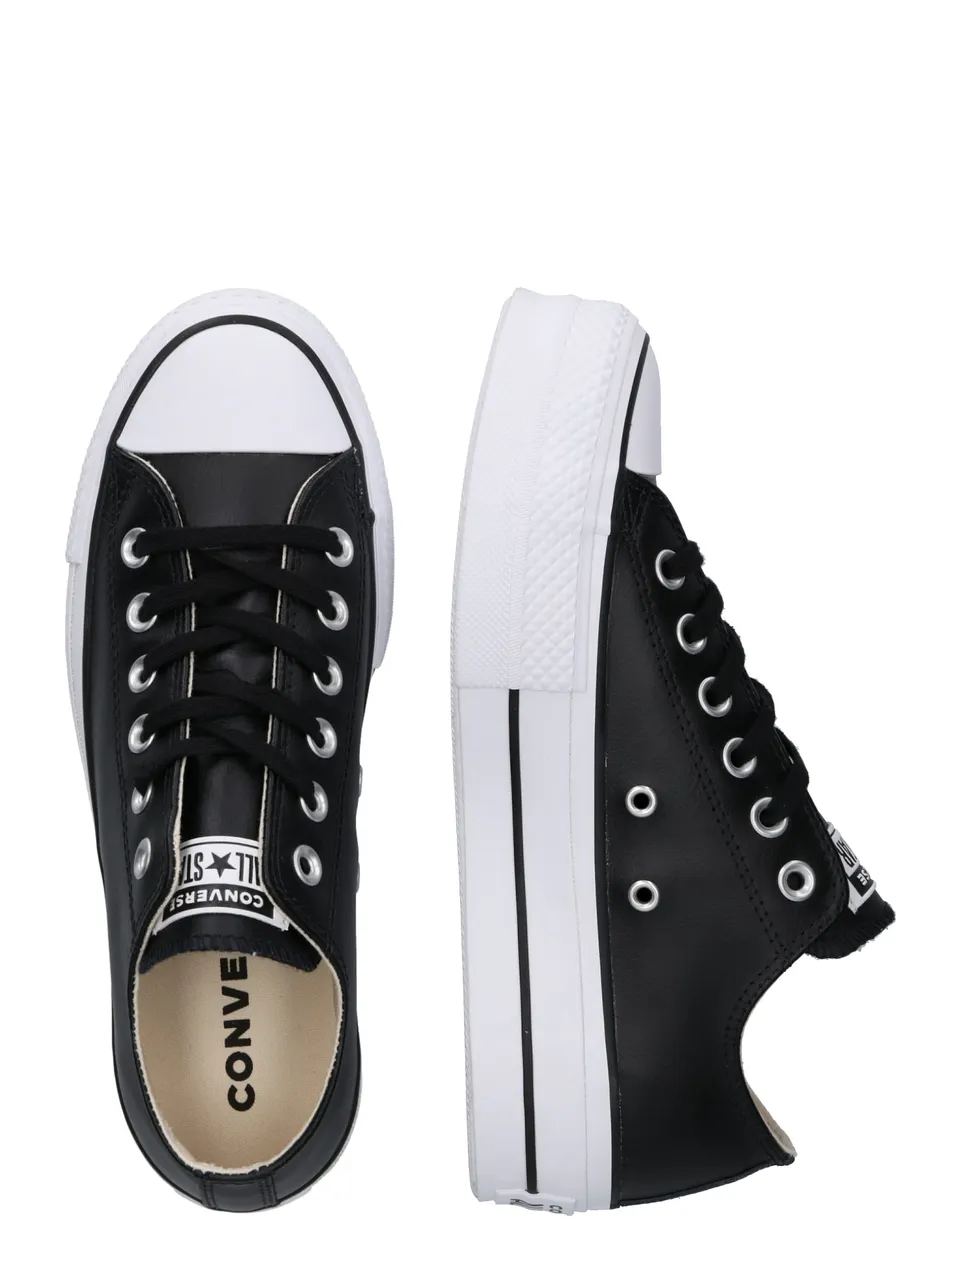 Sneakers laag 'CHUCK TAYLOR ALL STAR LIFT OX LEATHER'